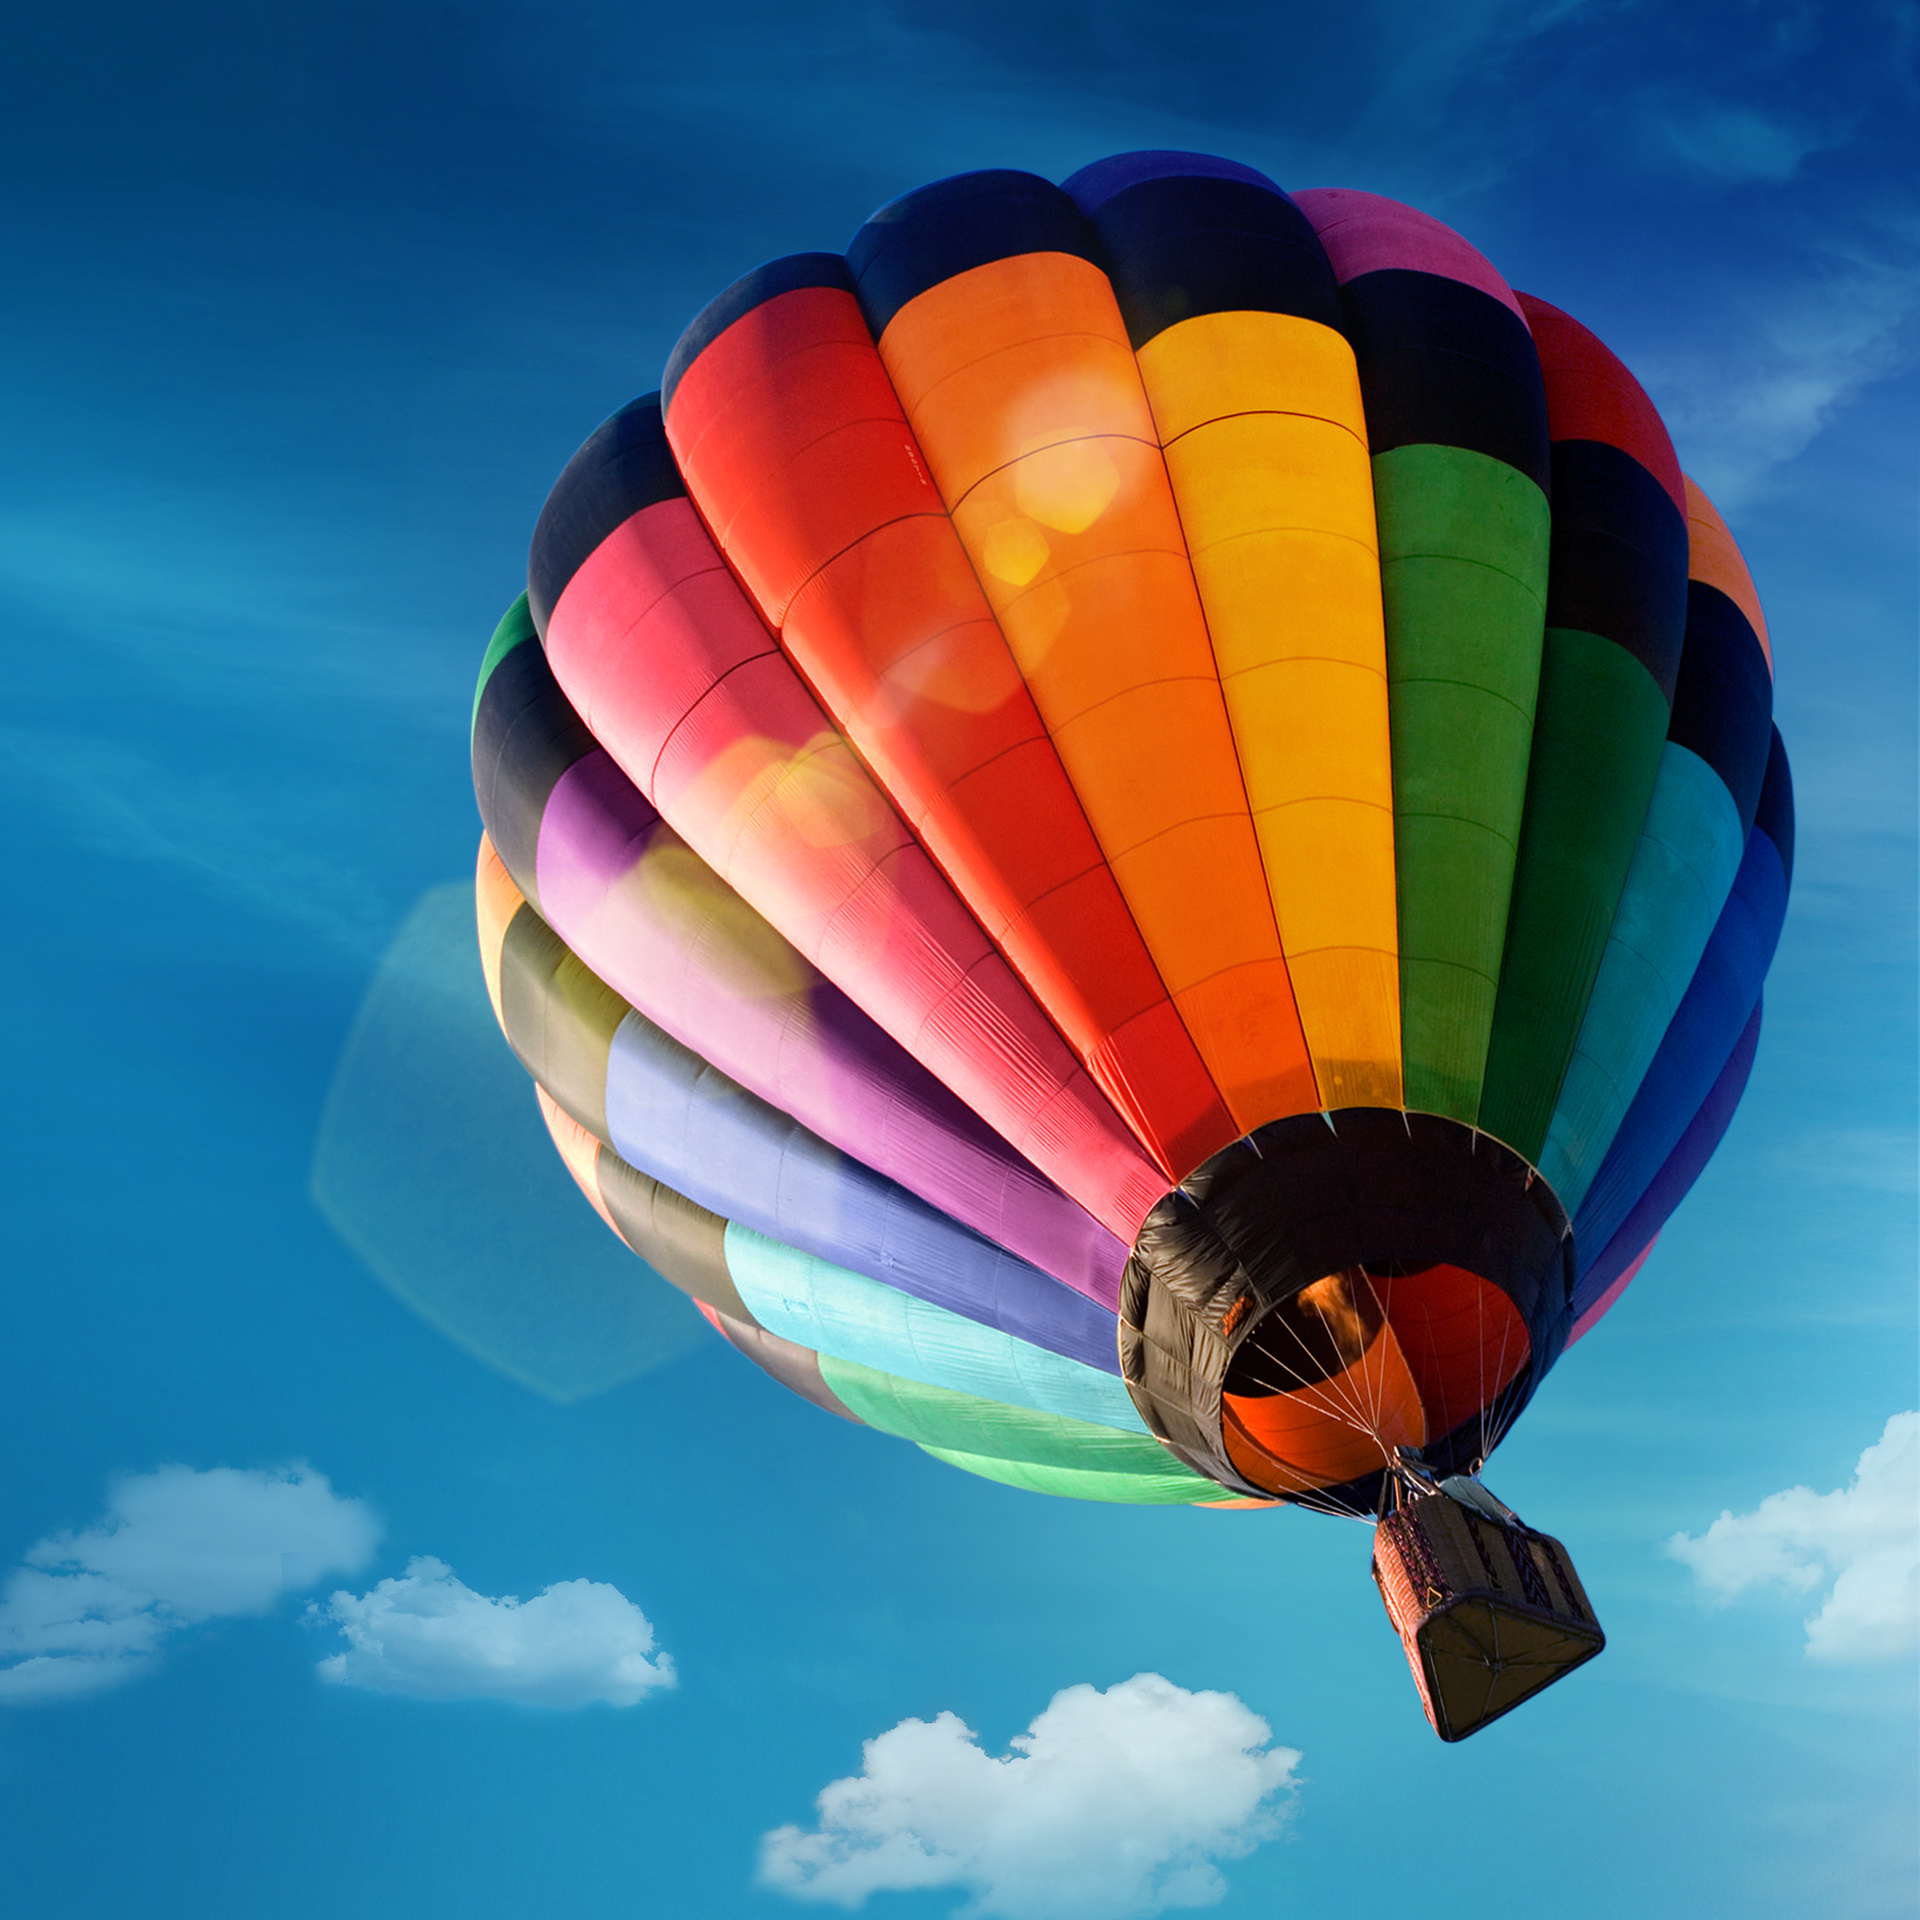 Air Sports: Montgolfier that's floating with the wind at the angle of view, Hot air balloon with a gondola. 1920x1920 HD Wallpaper.